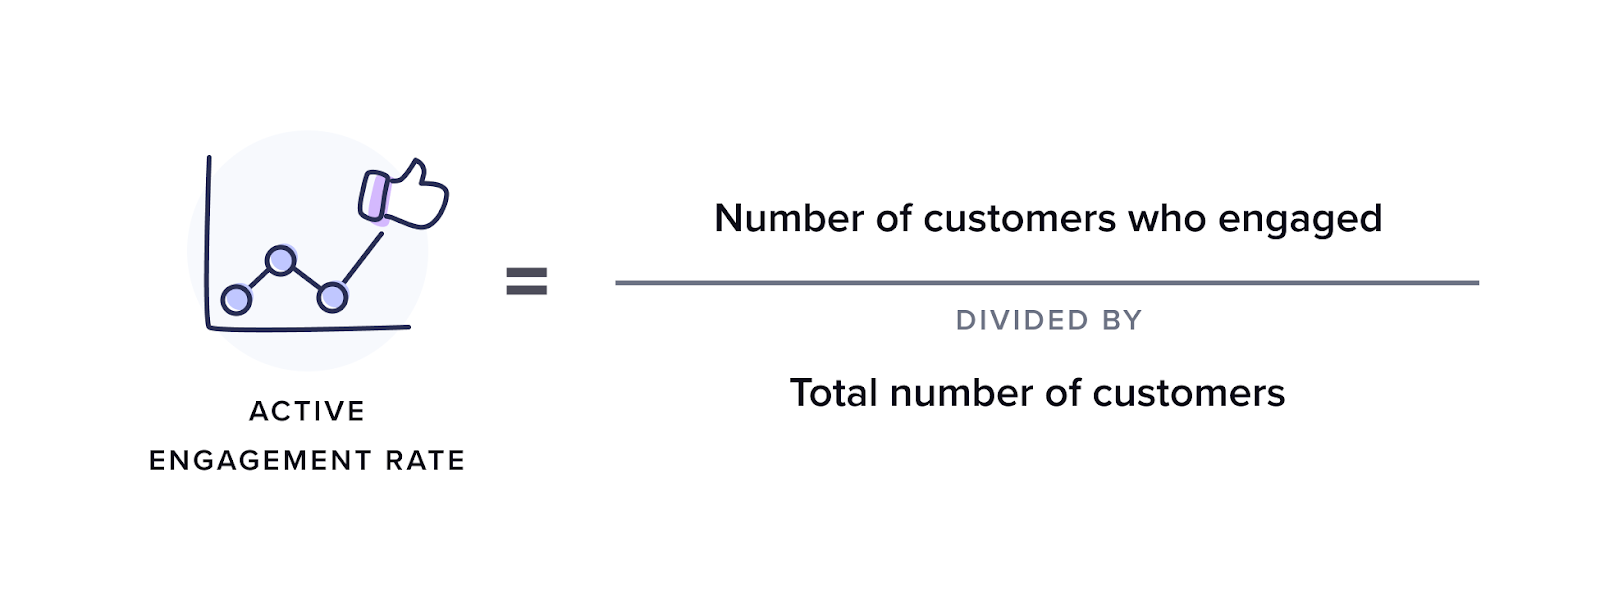 Loyalty marketing–Active engagement rate formula. Active engagement rate equals number of customers who engaged divided by total number of customers.